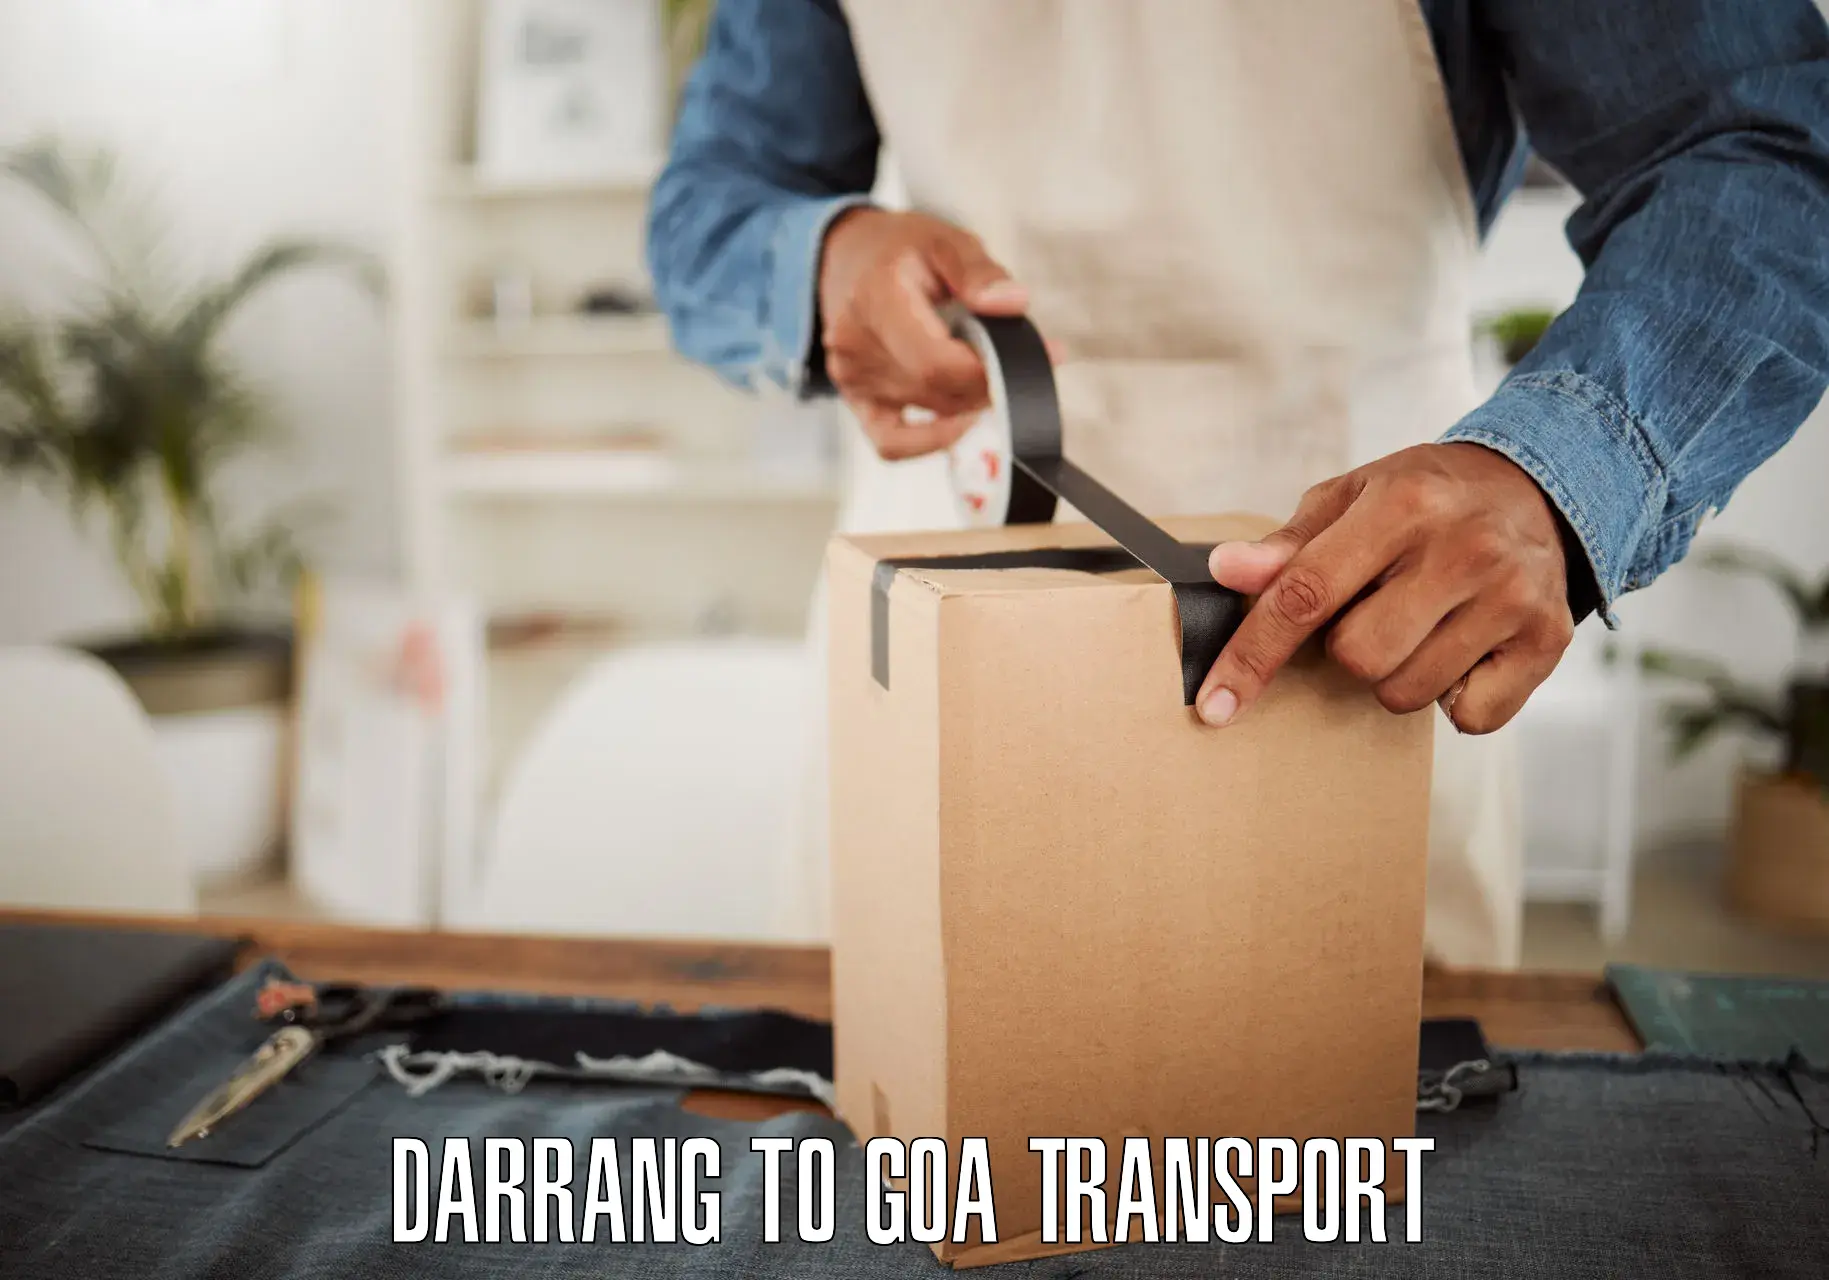 Transport in sharing Darrang to South Goa